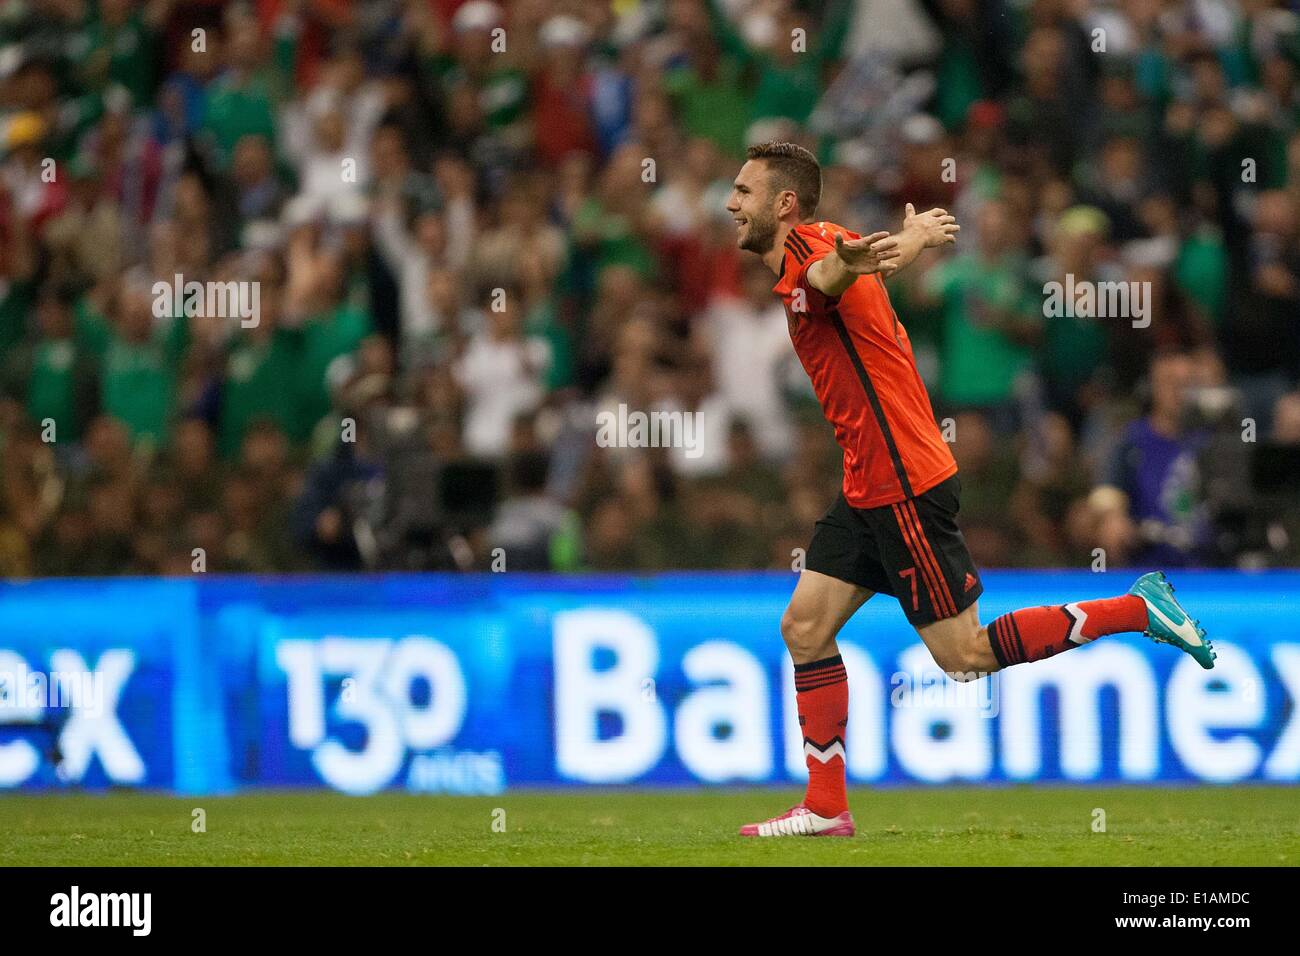 Mexico City, Mexico. 28th May, 2014. Miguel Layun from Mexico celebrates scoring during a friendly match against Israle at the Azteca Stadium in Mexico City, capital of Mexico, on May 28, 2014. Credit:  Pedro Mera/Xinhua/Alamy Live News Stock Photo